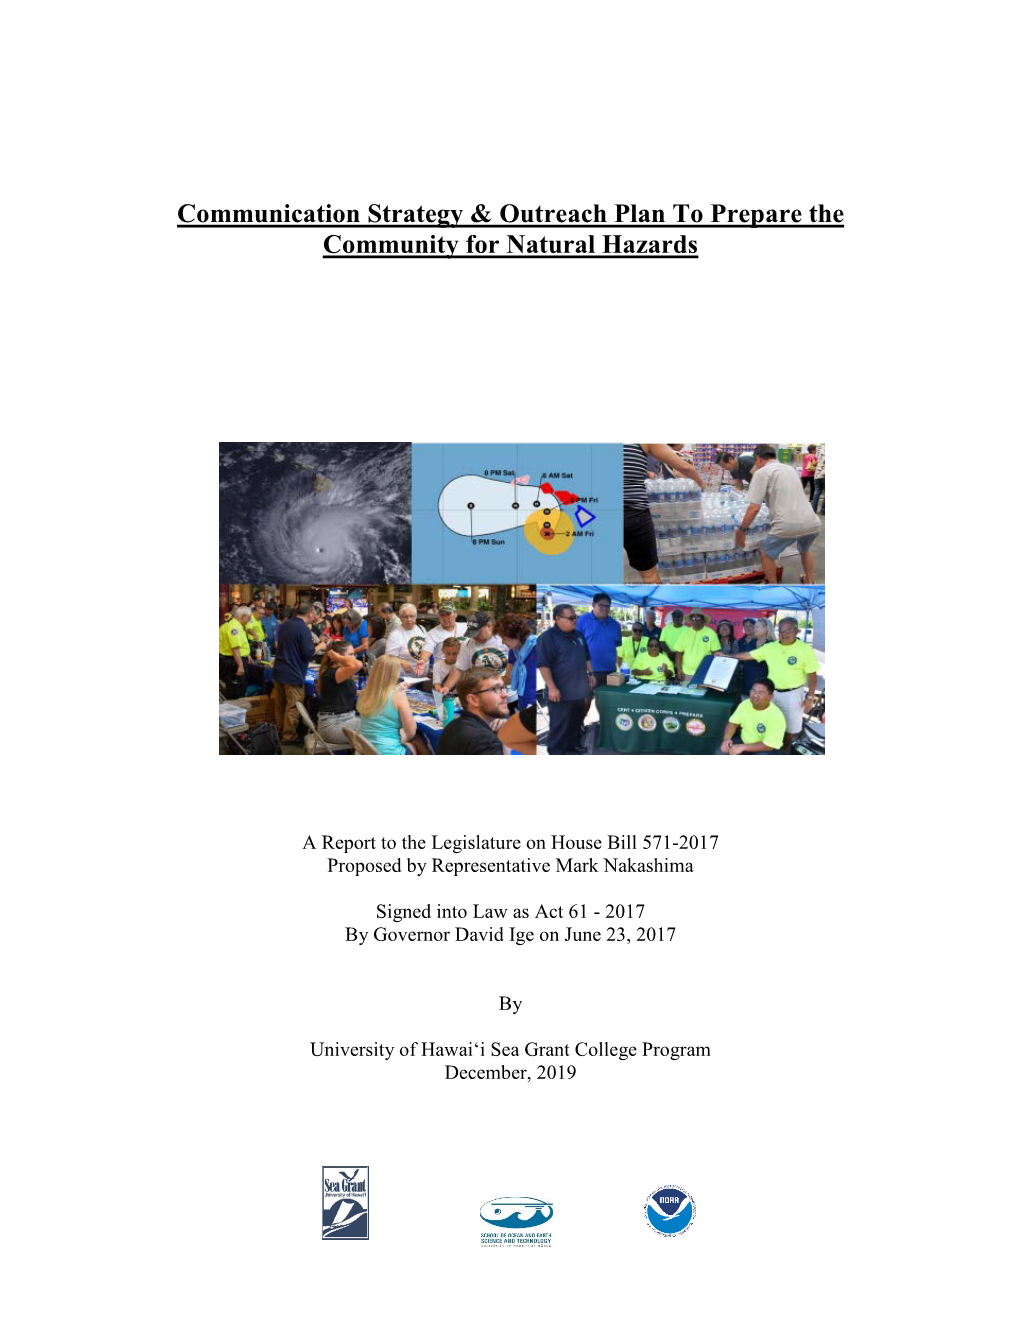 Communication Strategy & Outreach Plan to Prepare